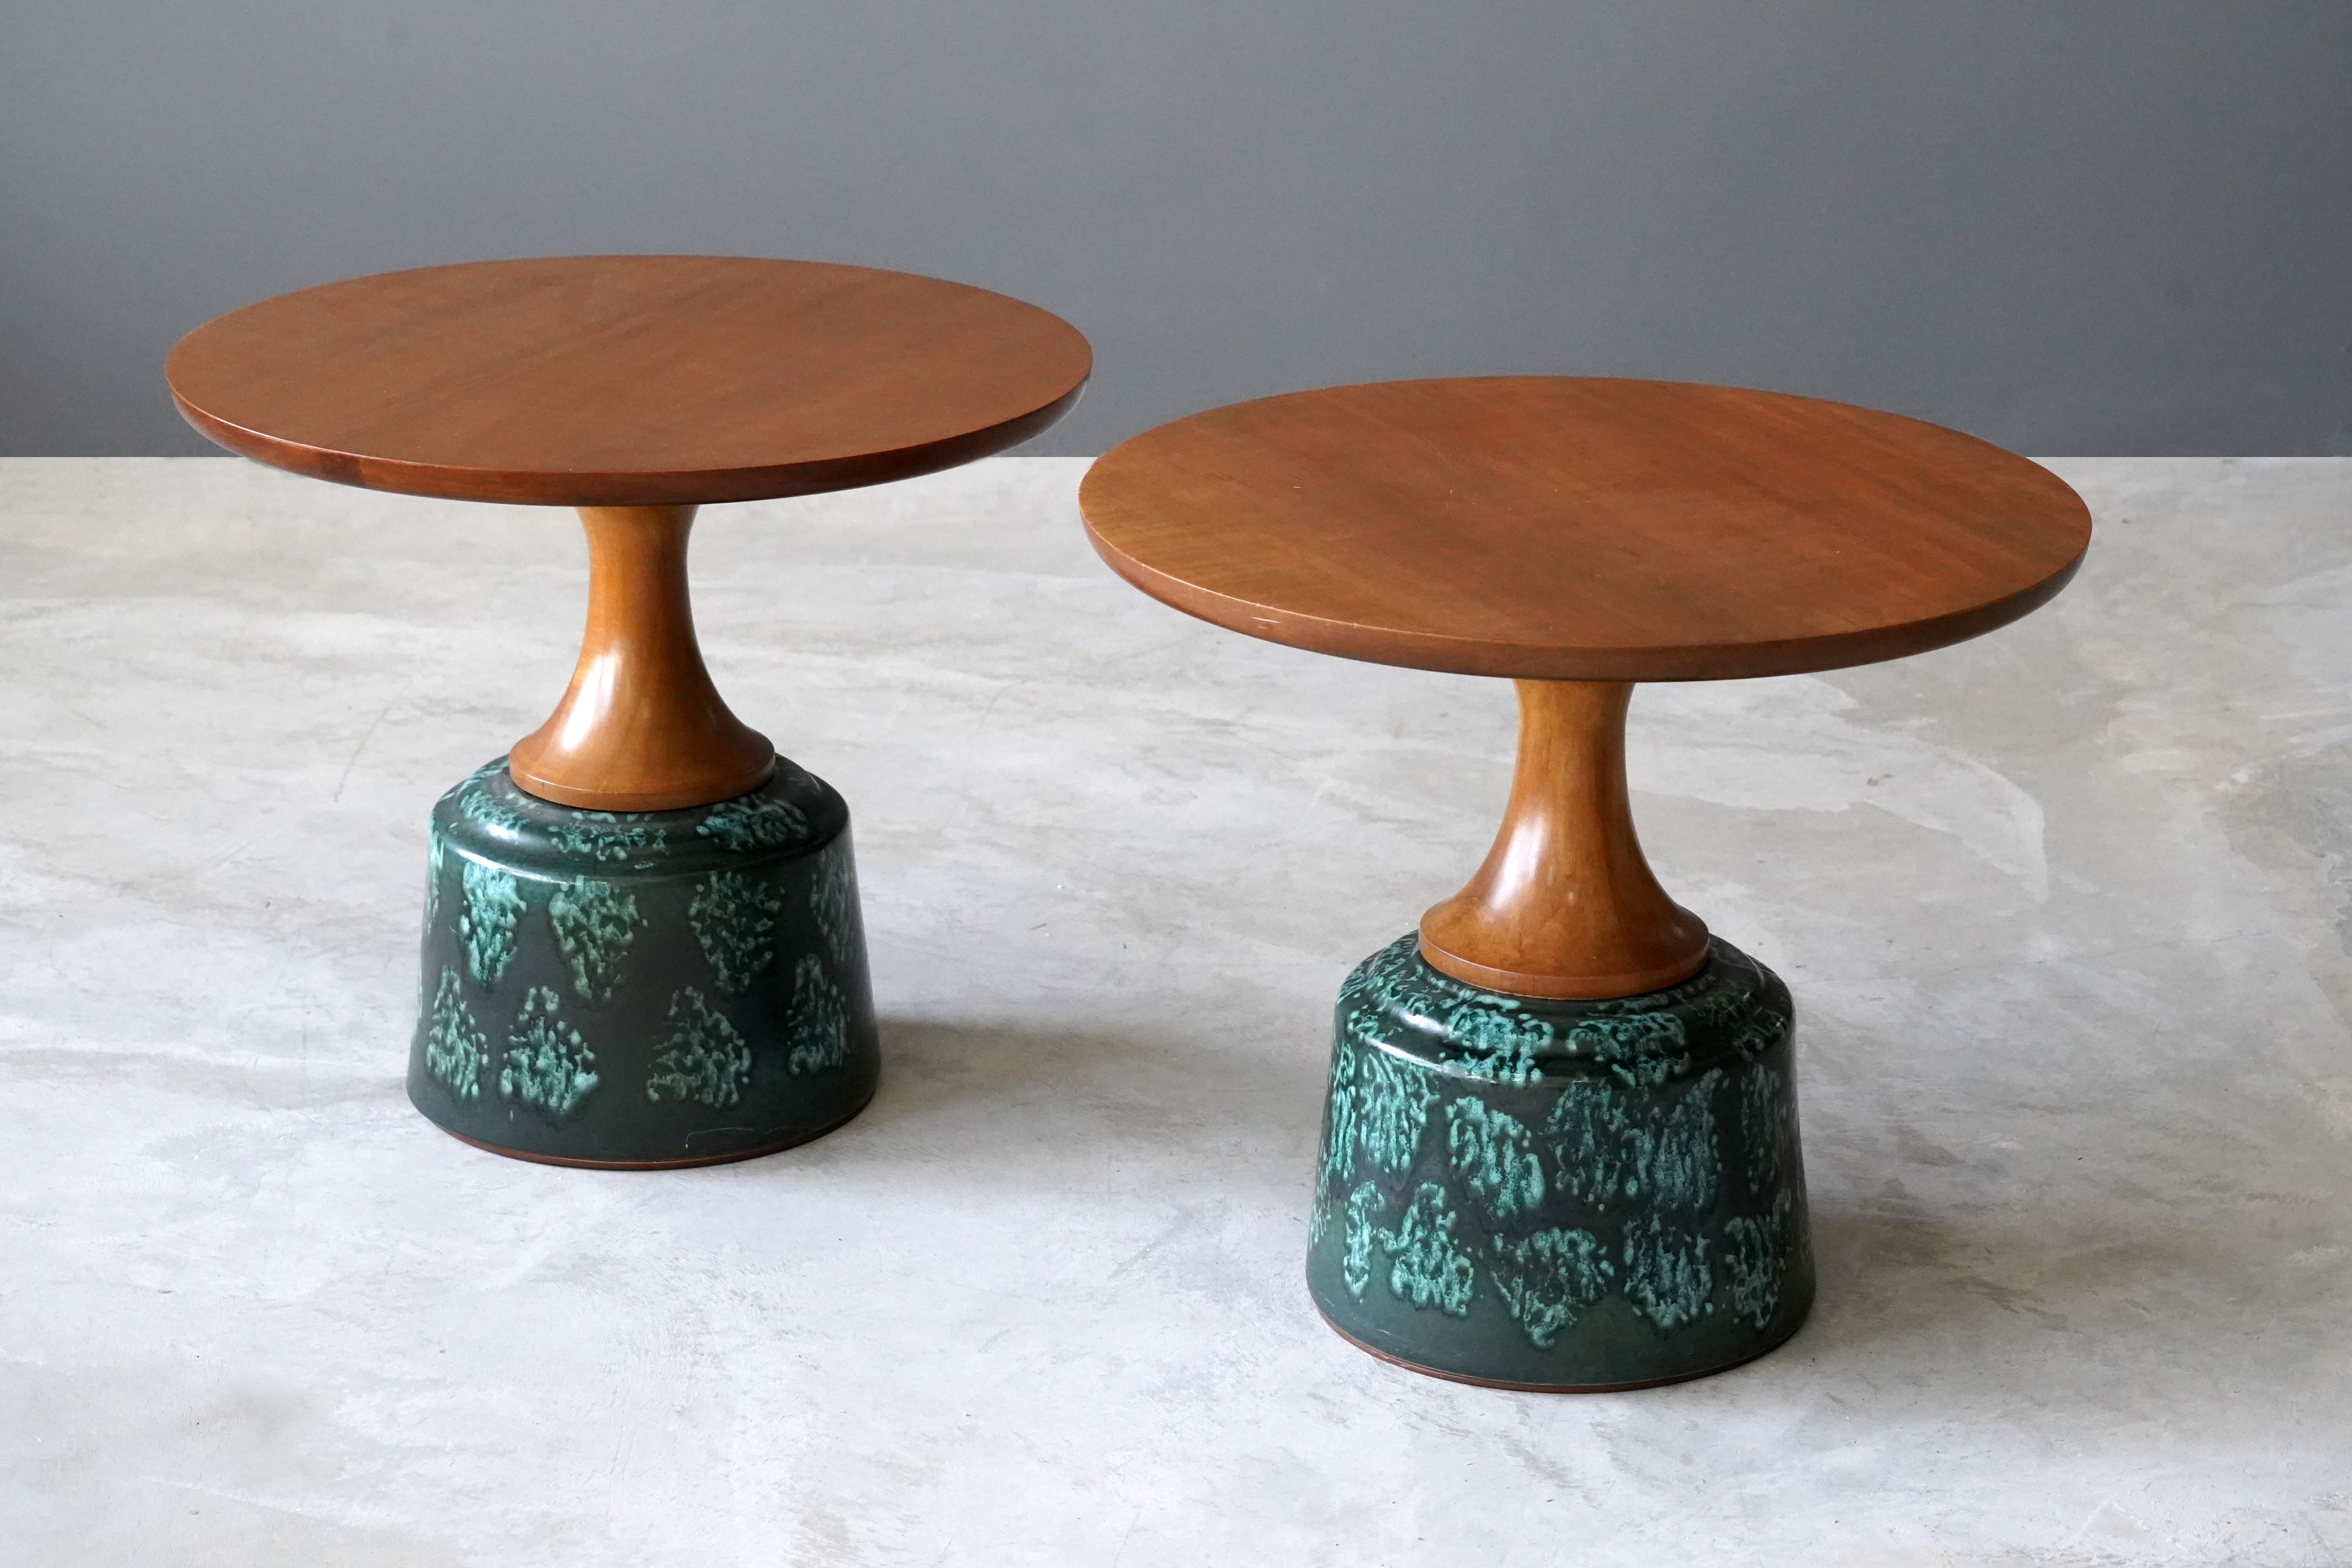 A pair of side table or occasional tables, designed by John Van Koert and produced by Drexel Furniture Company, North Carolina, America. 

Finely carved cherrywood tops are mounted atop the glazed ceramic bases. 

Other designers of the period